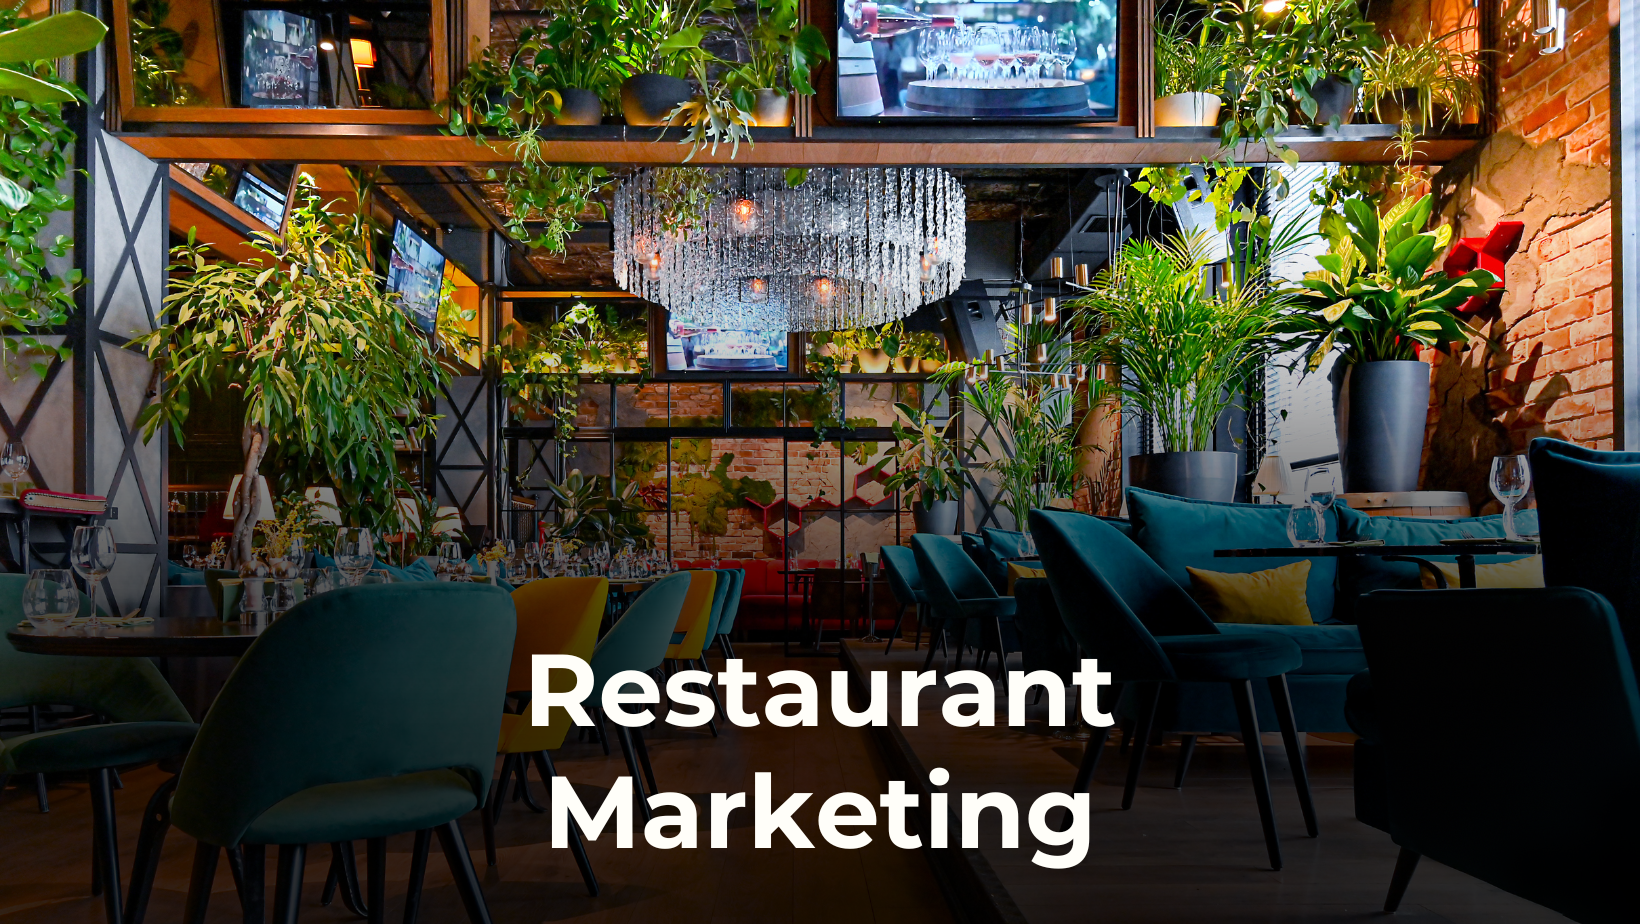 Restaurant Marketing | 7 Ways to Attract More Foot Traffic